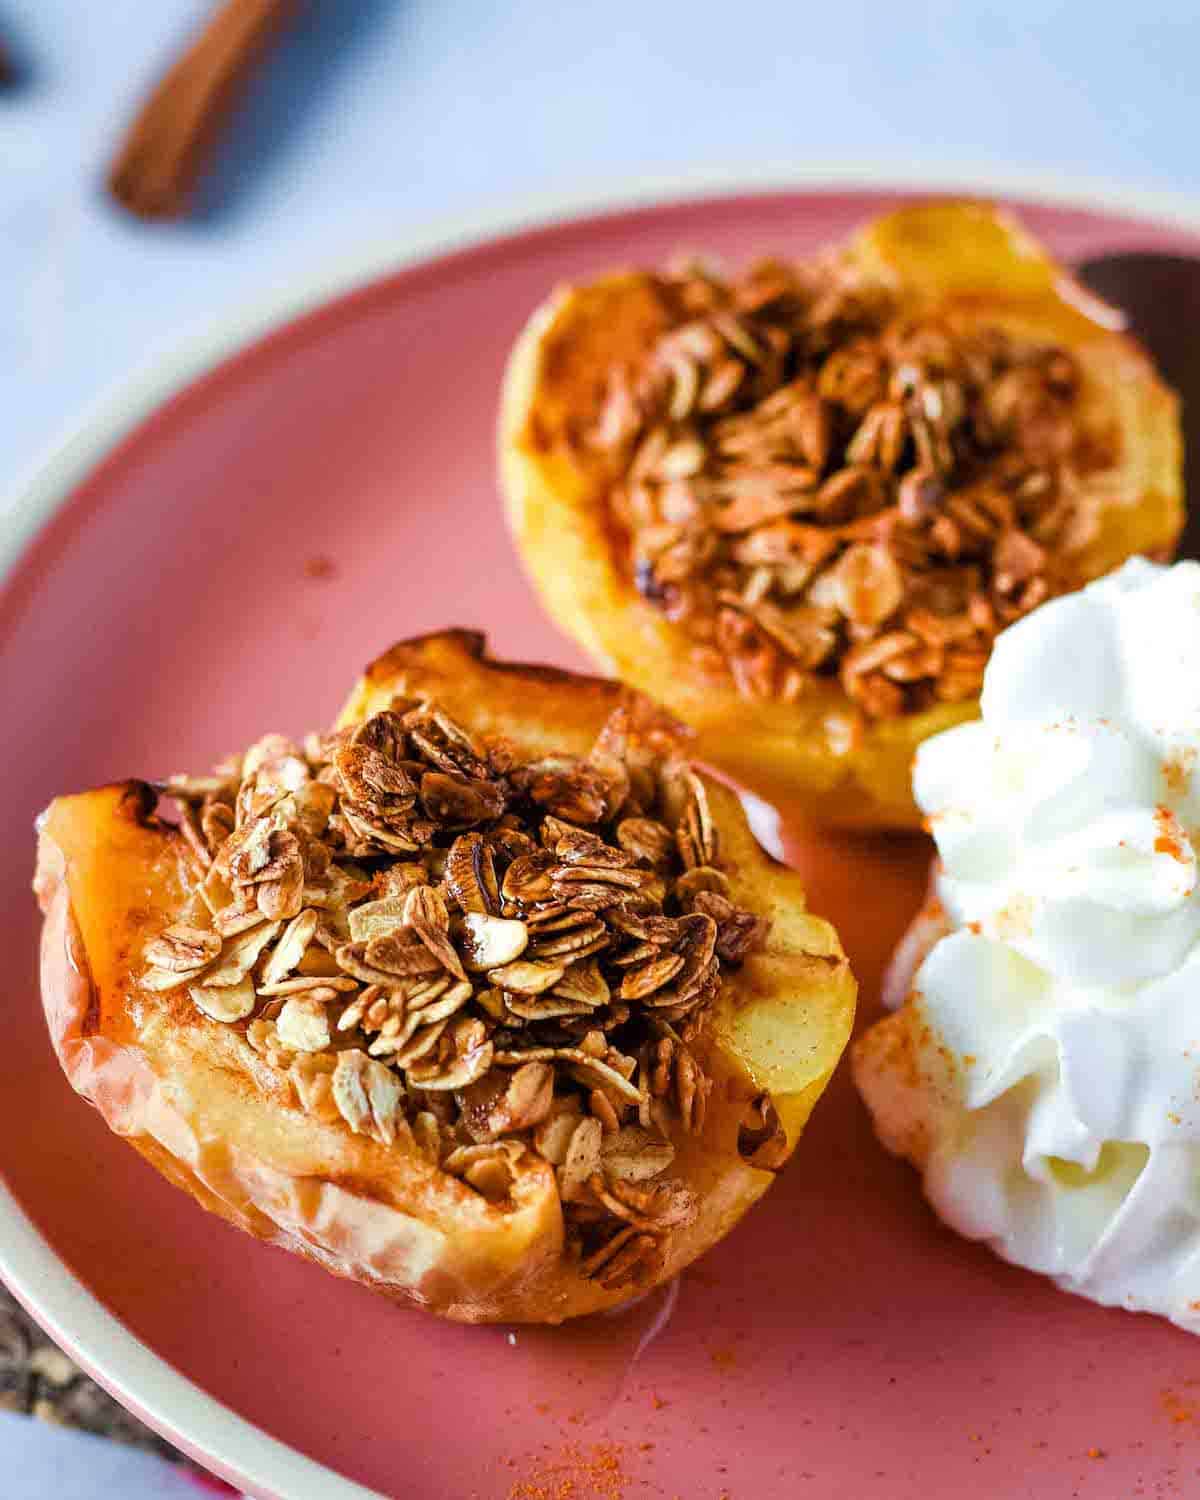 Air fryer baked apples are shown on a pink plate with whipped cream.